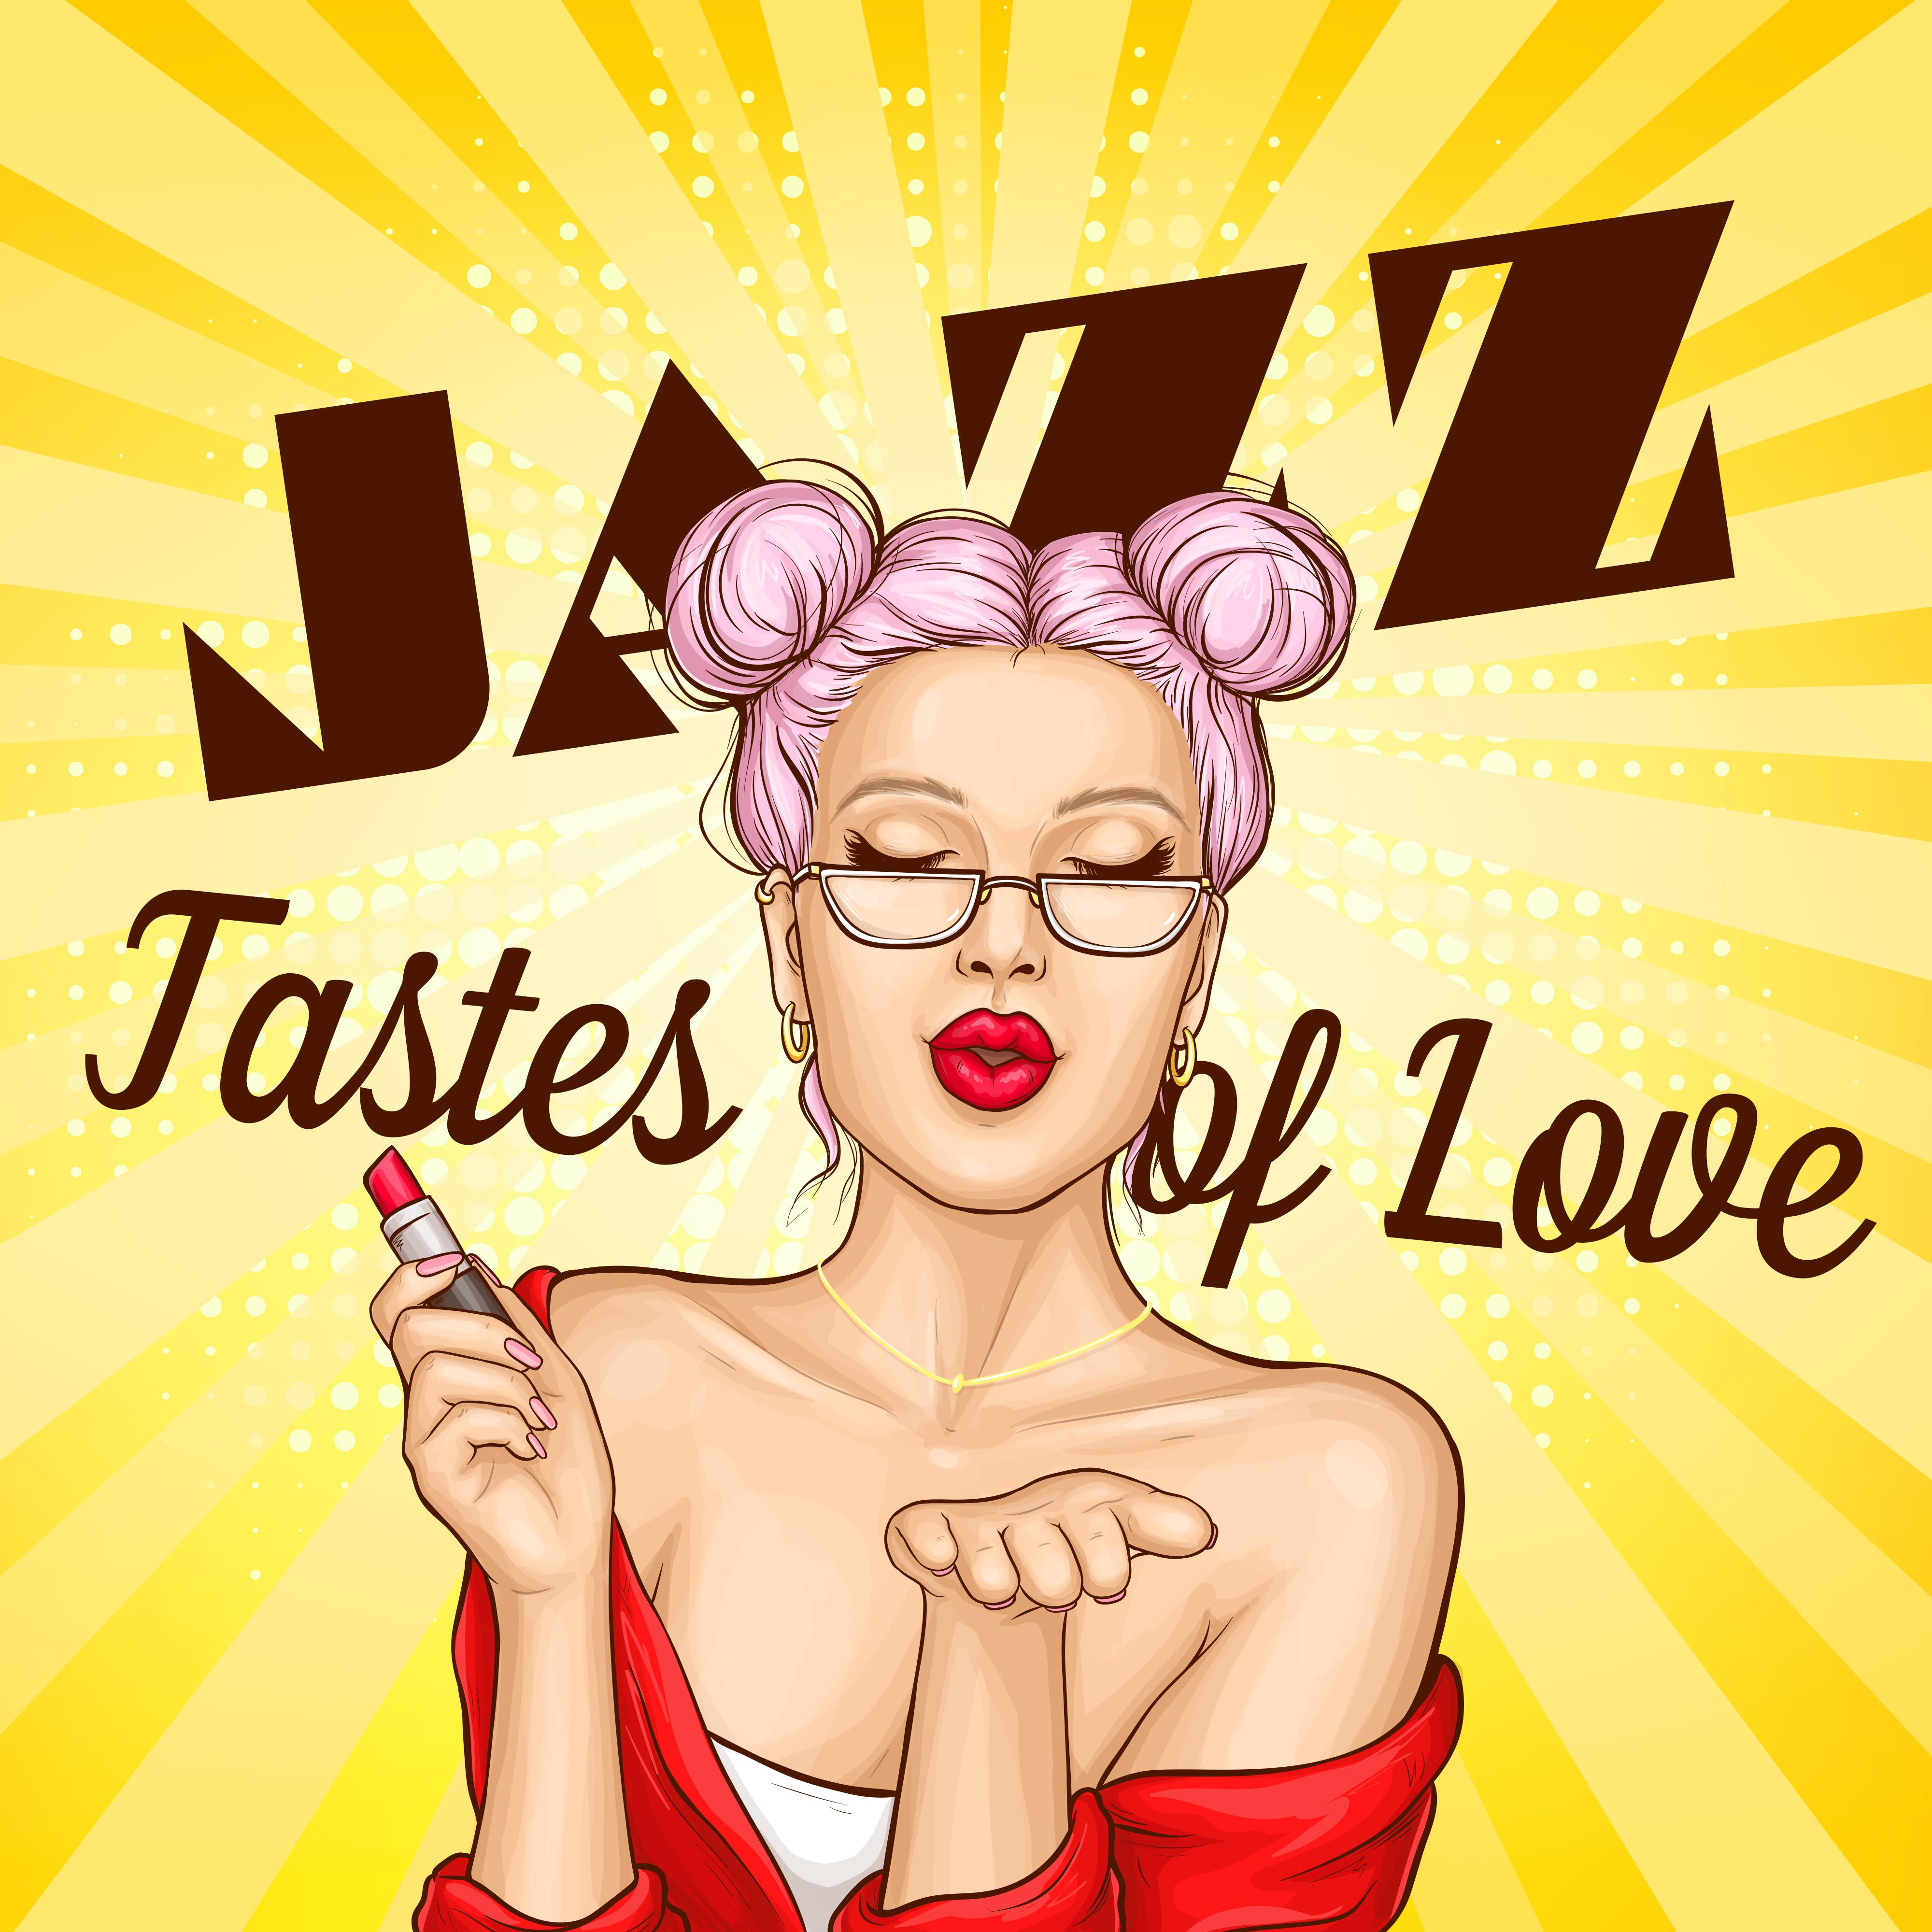 Jazz Tastes of Love: Smooth Jazz 2019 Music Selection Perfect for Romantic Dinner with Love, Spending Many Wonderful Moments Together Full of Love & Passion, Soft Sounds of Piano, Sax & Many More